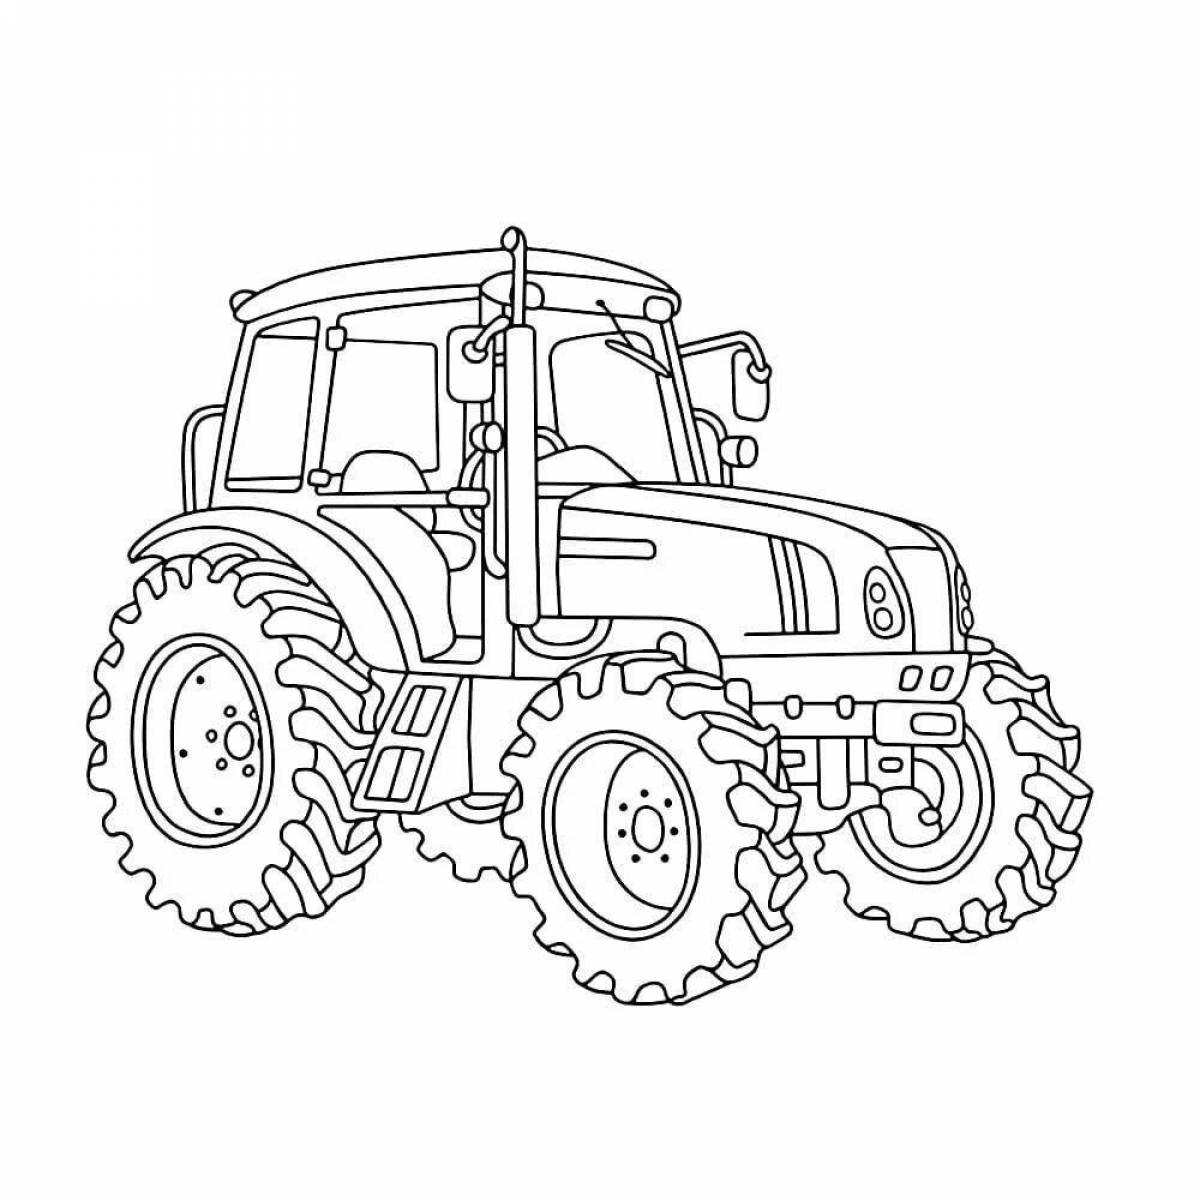 Coloring page glamorous belarusian tractor